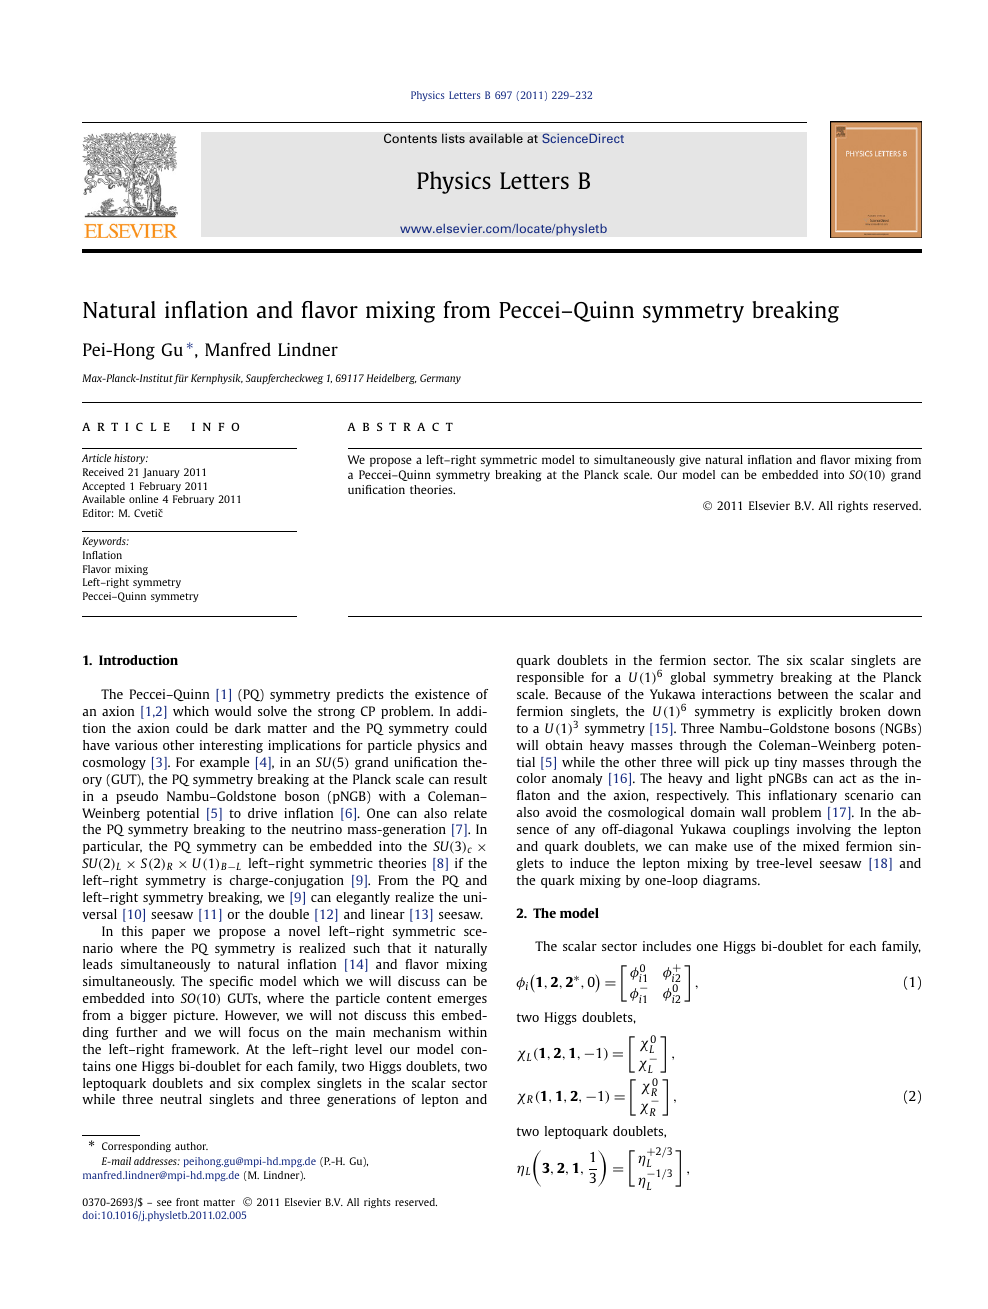 Natural Inflation And Flavor Mixing From Peccei Quinn Symmetry Breaking Topic Of Research Paper In Physical Sciences Download Scholarly Article Pdf And Read For Free On Cyberleninka Open Science Hub